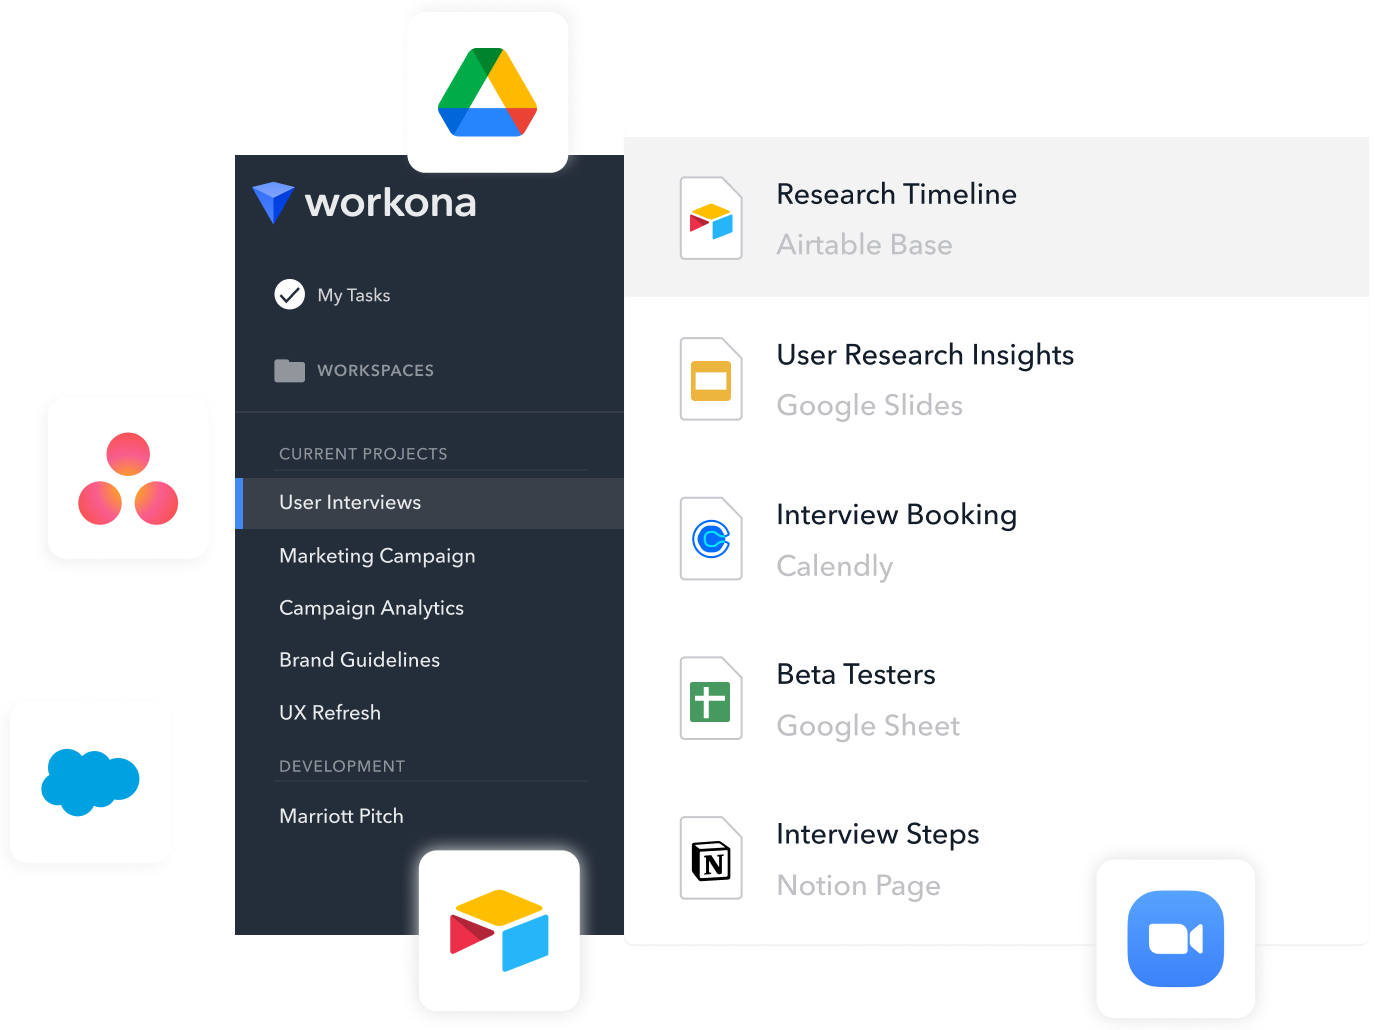 Workspaces for each project